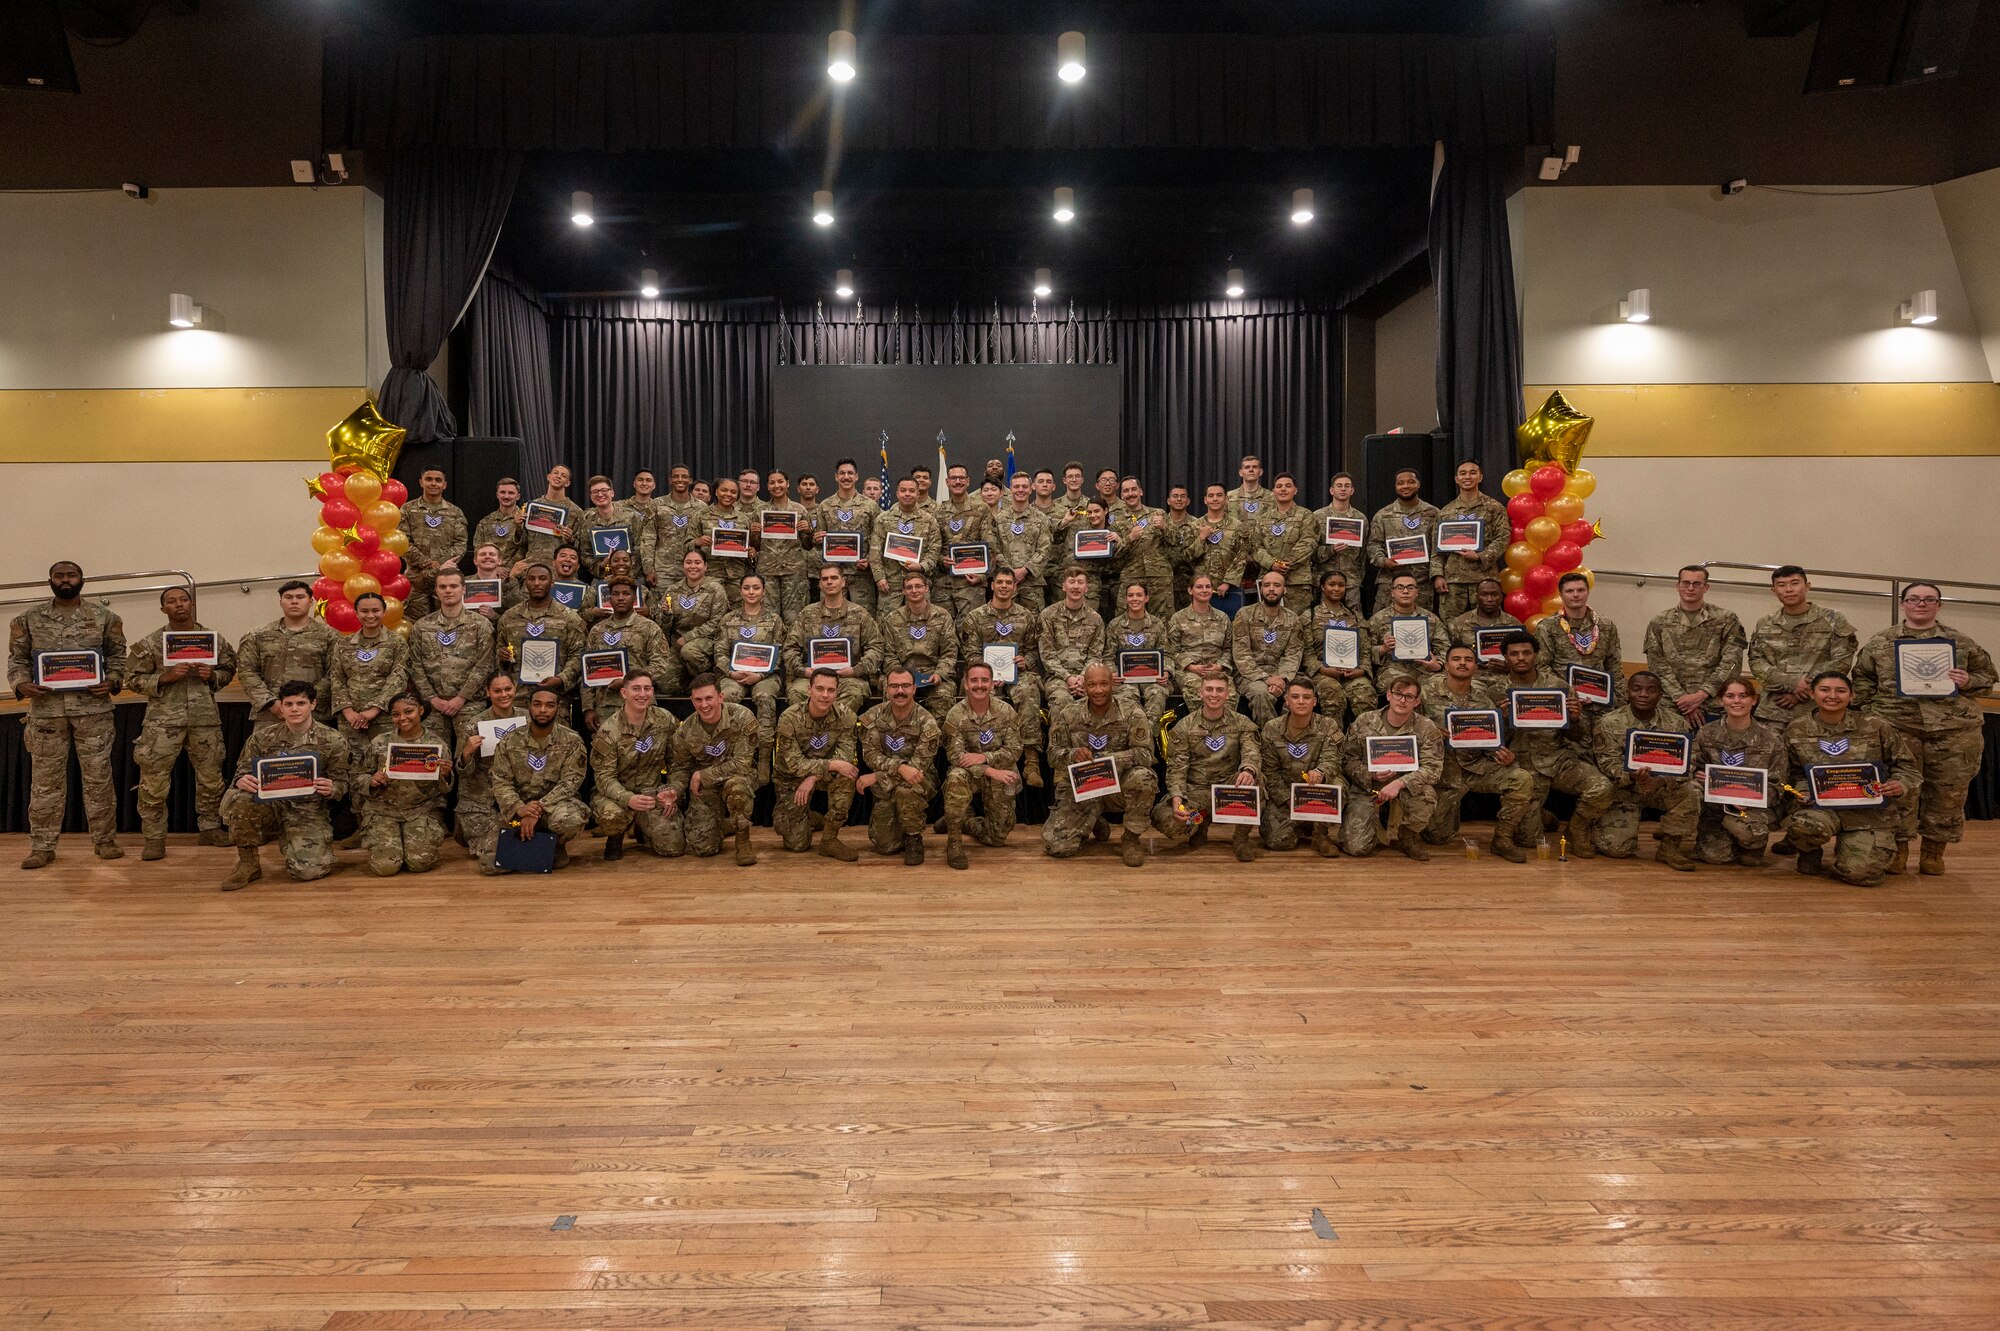 U.S. Air Force staff sergeant selectees pose for a photo at the Staff Sgt. release party at Osan Air Base, Republic of Korea, Aug. 16, 2023. Air Force officials have selected 9,000 senior airmen for promotion to Staff Sgt. out of 51,717 eligible for a selection rate of 17.4 percent in the 23E5 promotion cycle, which includes supplemental promotion opportunities. (U.S. Air Force photo by Senior Airman Aaron Edwards)